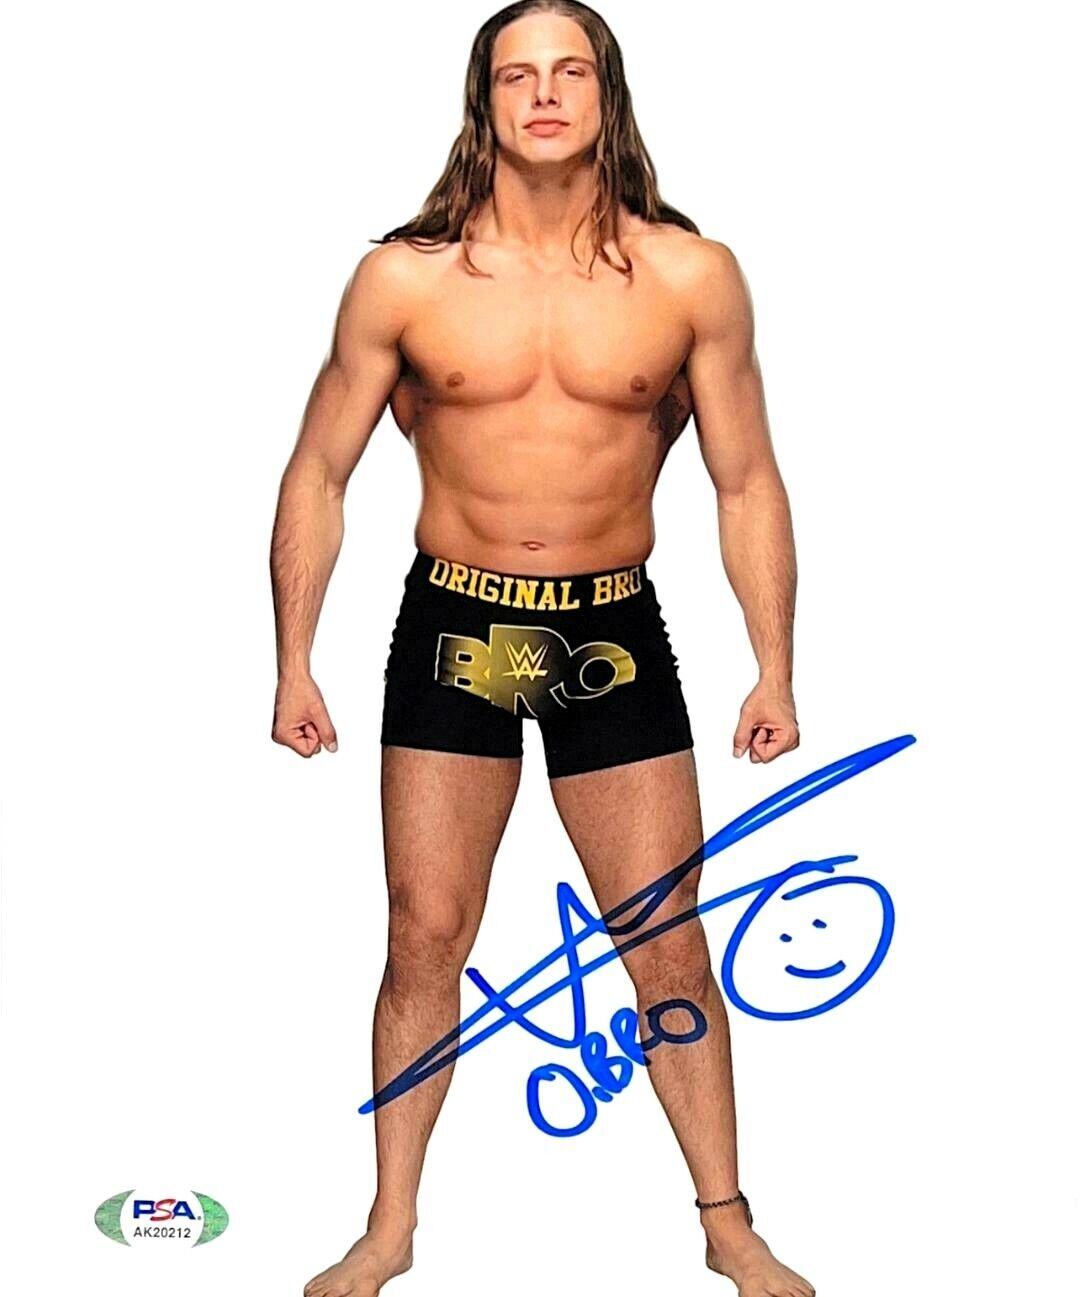 WWE MATT RIDDLE HAND SIGNED AUTOGRAPHED 8X10 WRESTLING Photo Poster painting WITH PSA DNA COA